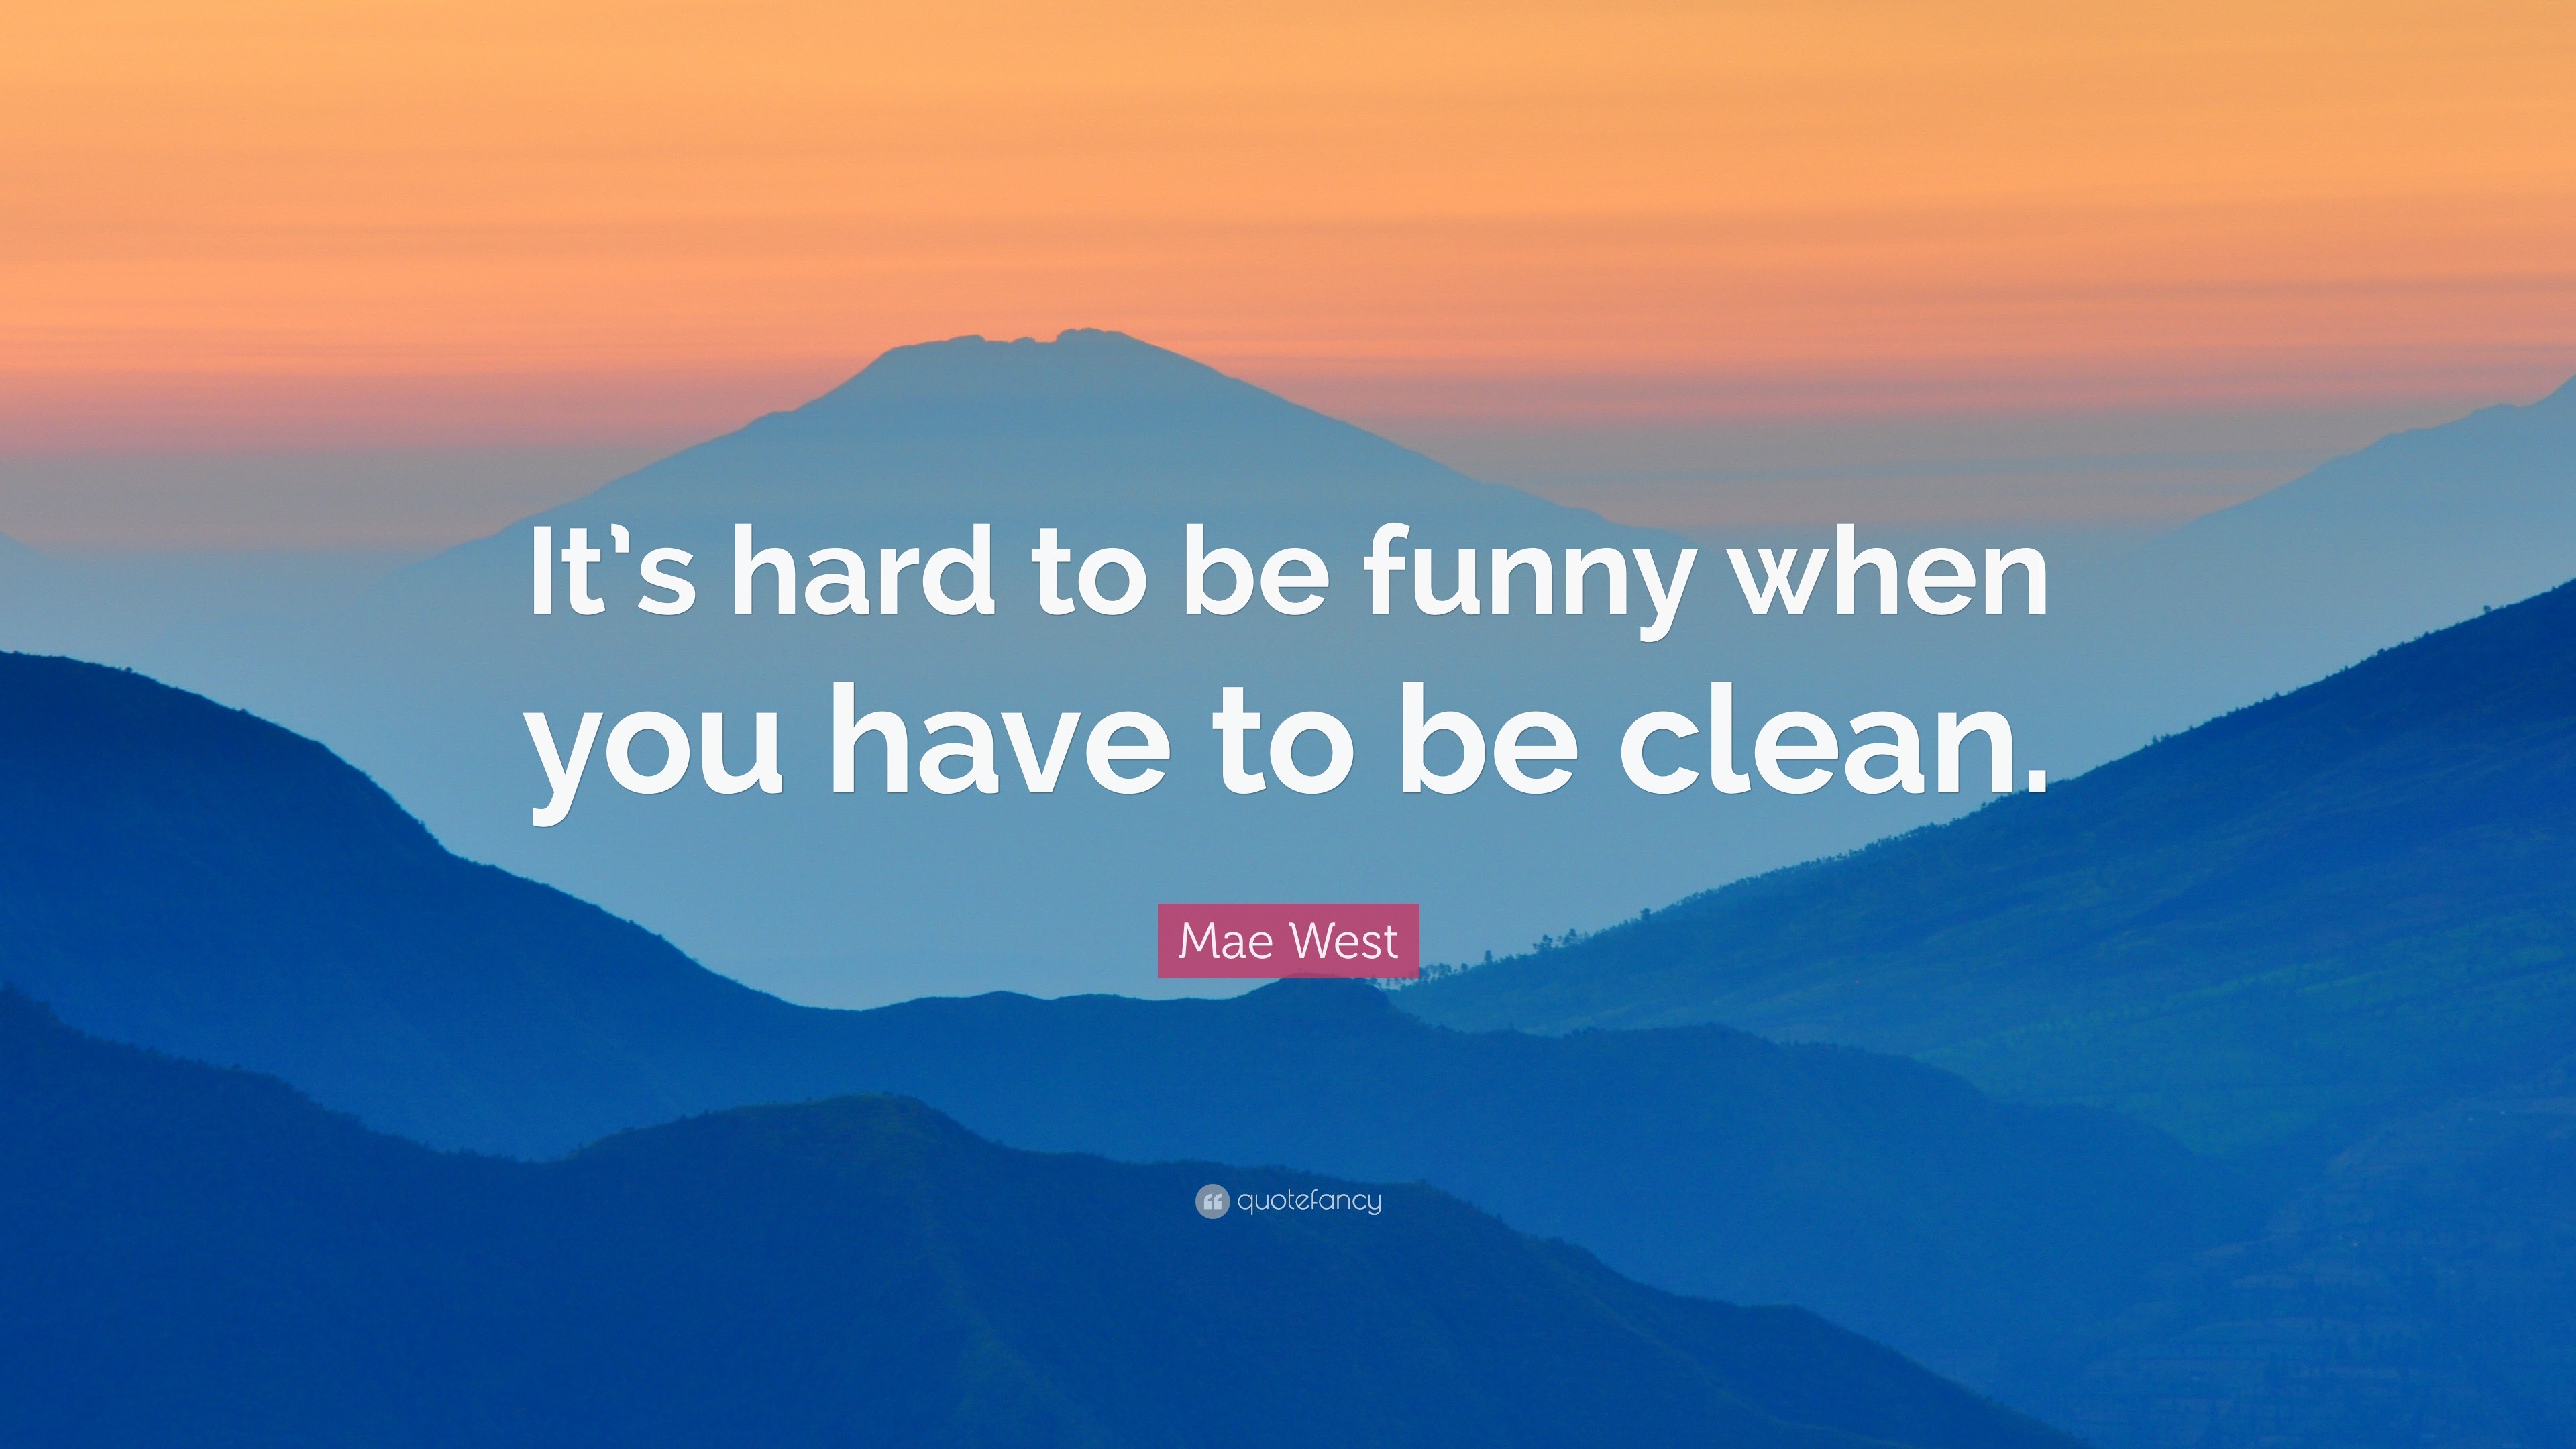 Mae West Quote: “It's hard to be funny when you have to be clean.”